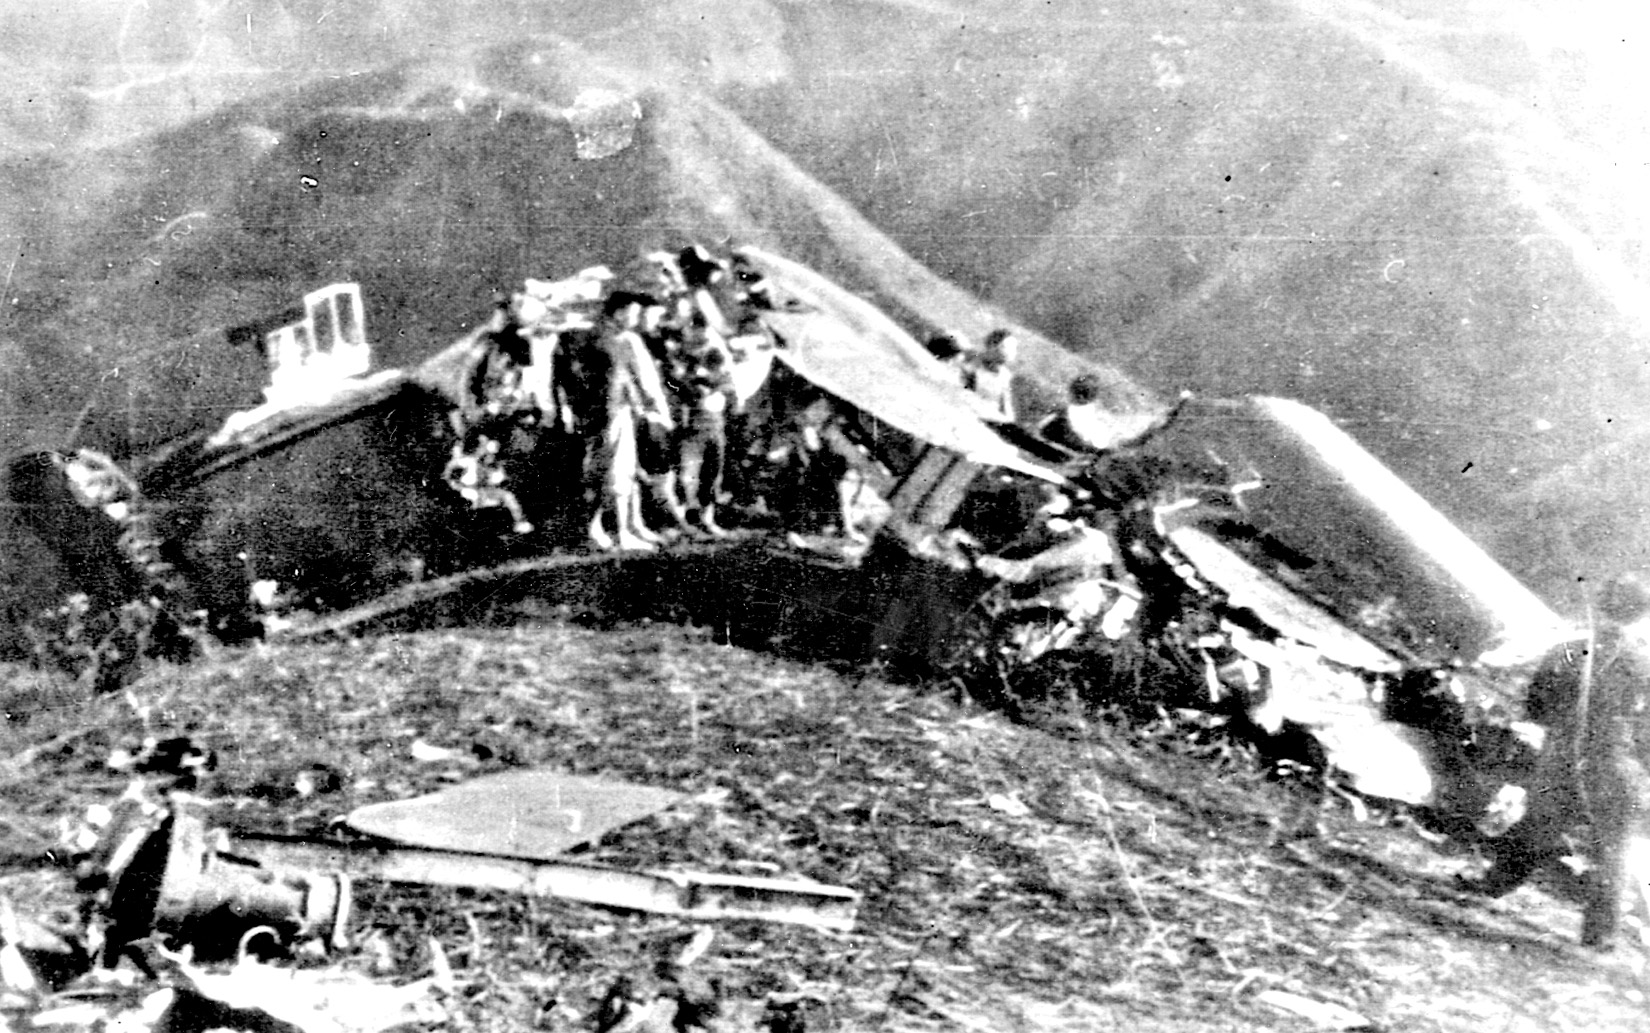 The wreckage of Doolittle’s shattered plane is strewn across a hillside in China. Doolittle is seated on the wing near the plane’s insignia.